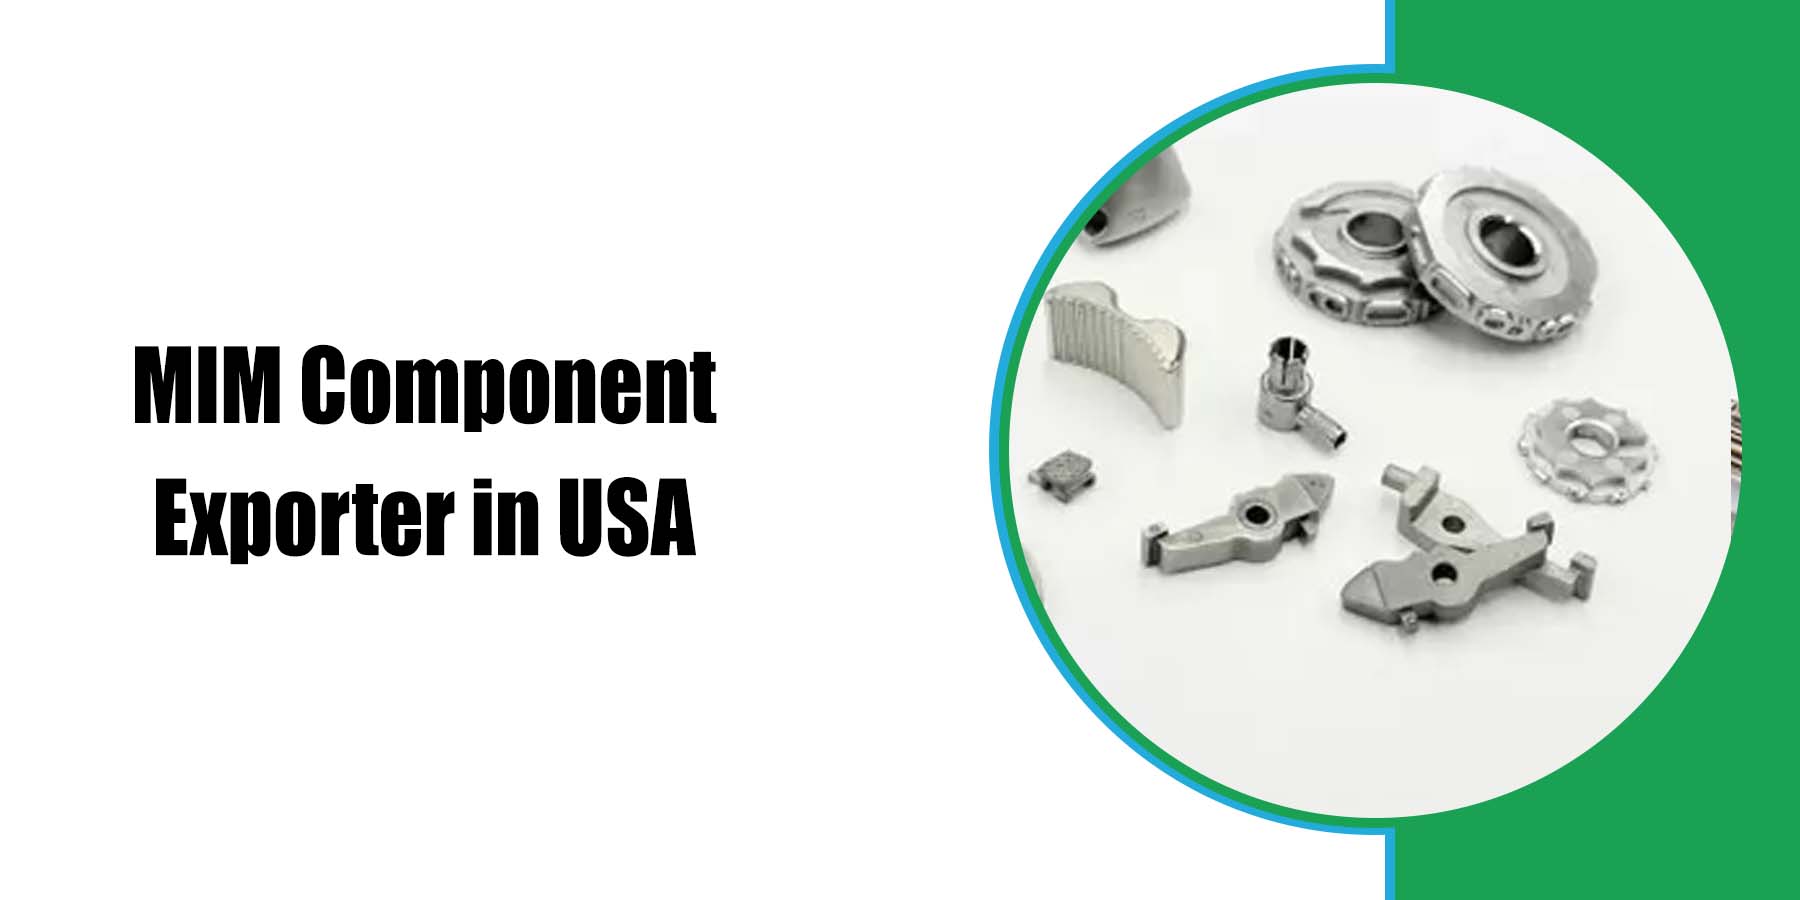 MIM Component Exporter in USA